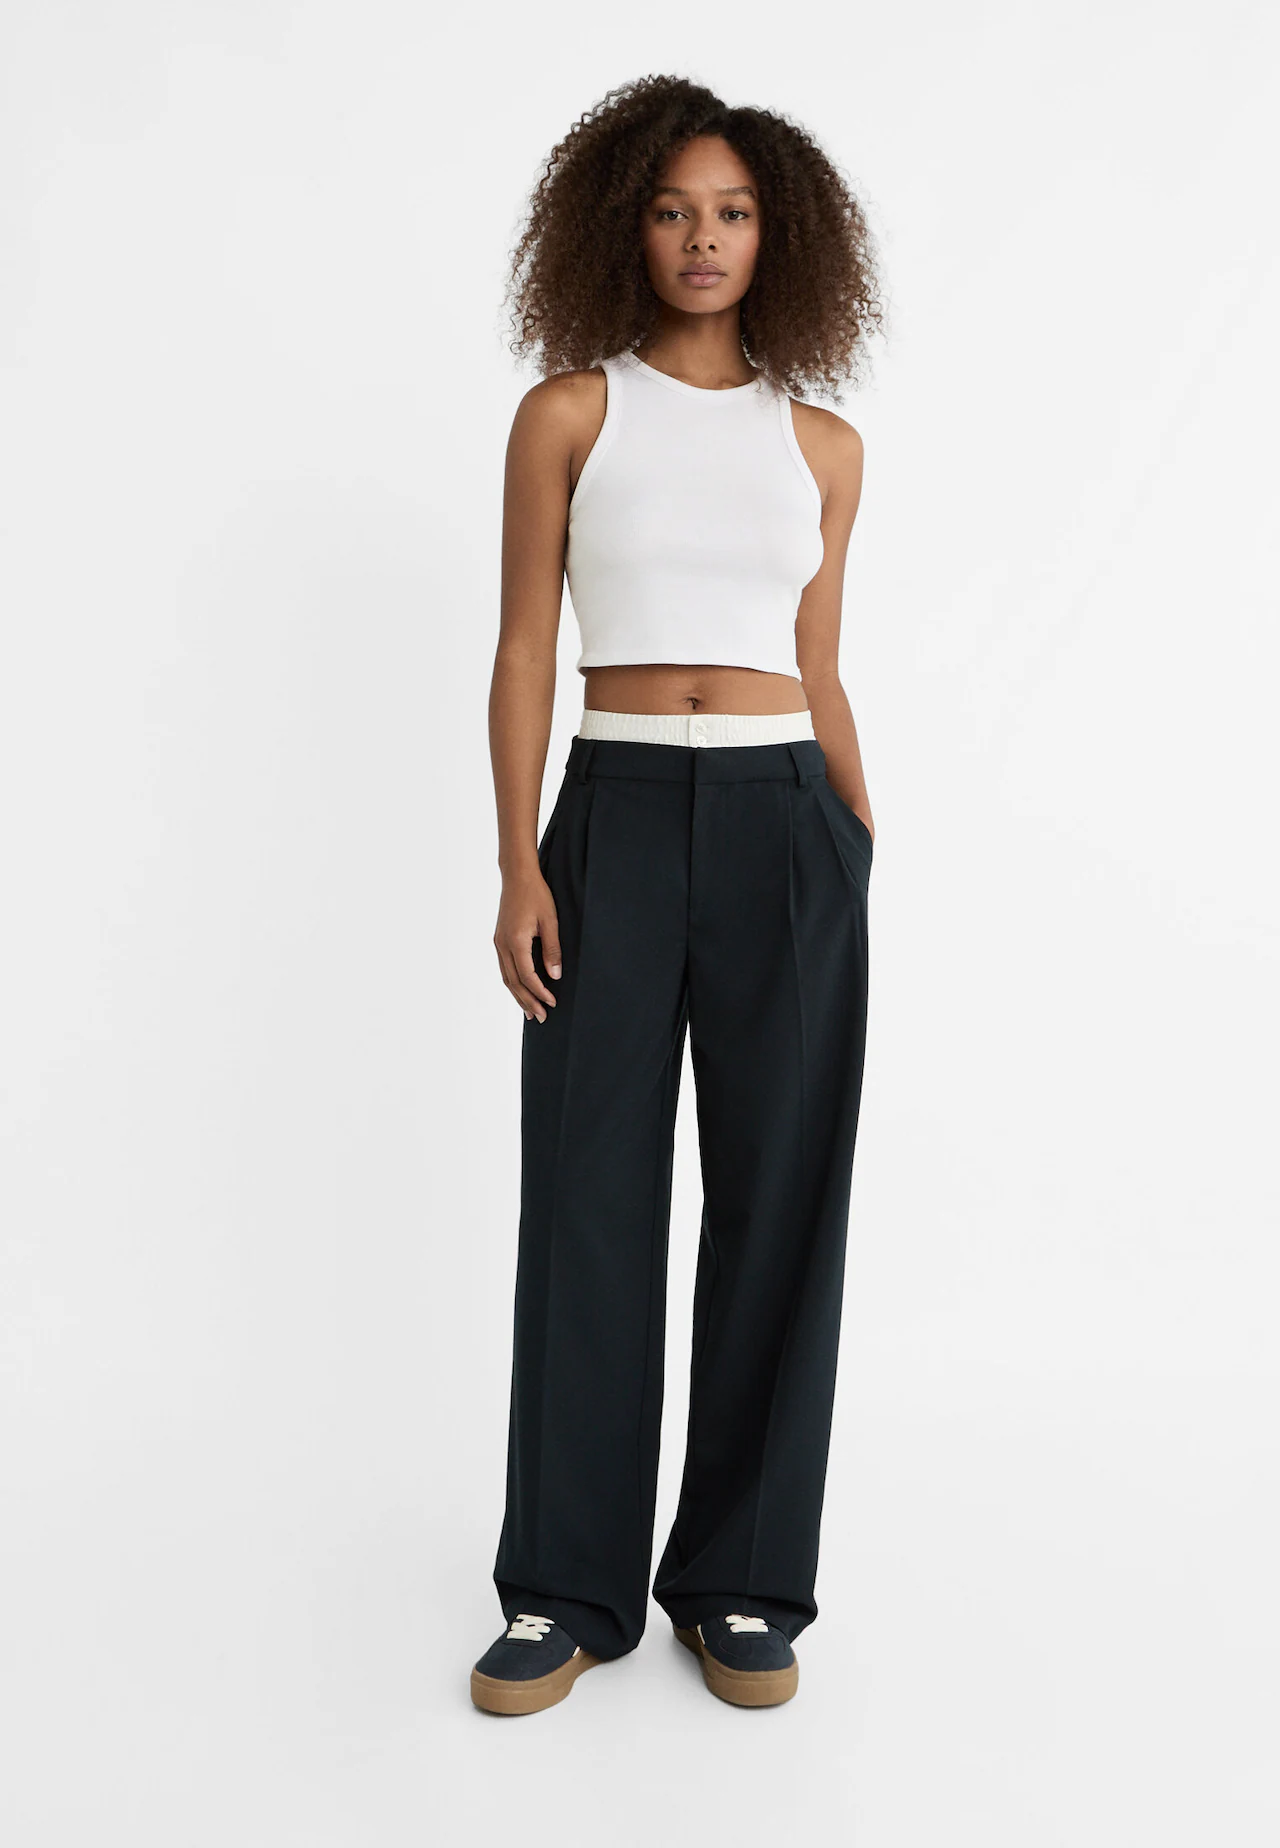 Smart trousers with contrast waistband - Women's fashion